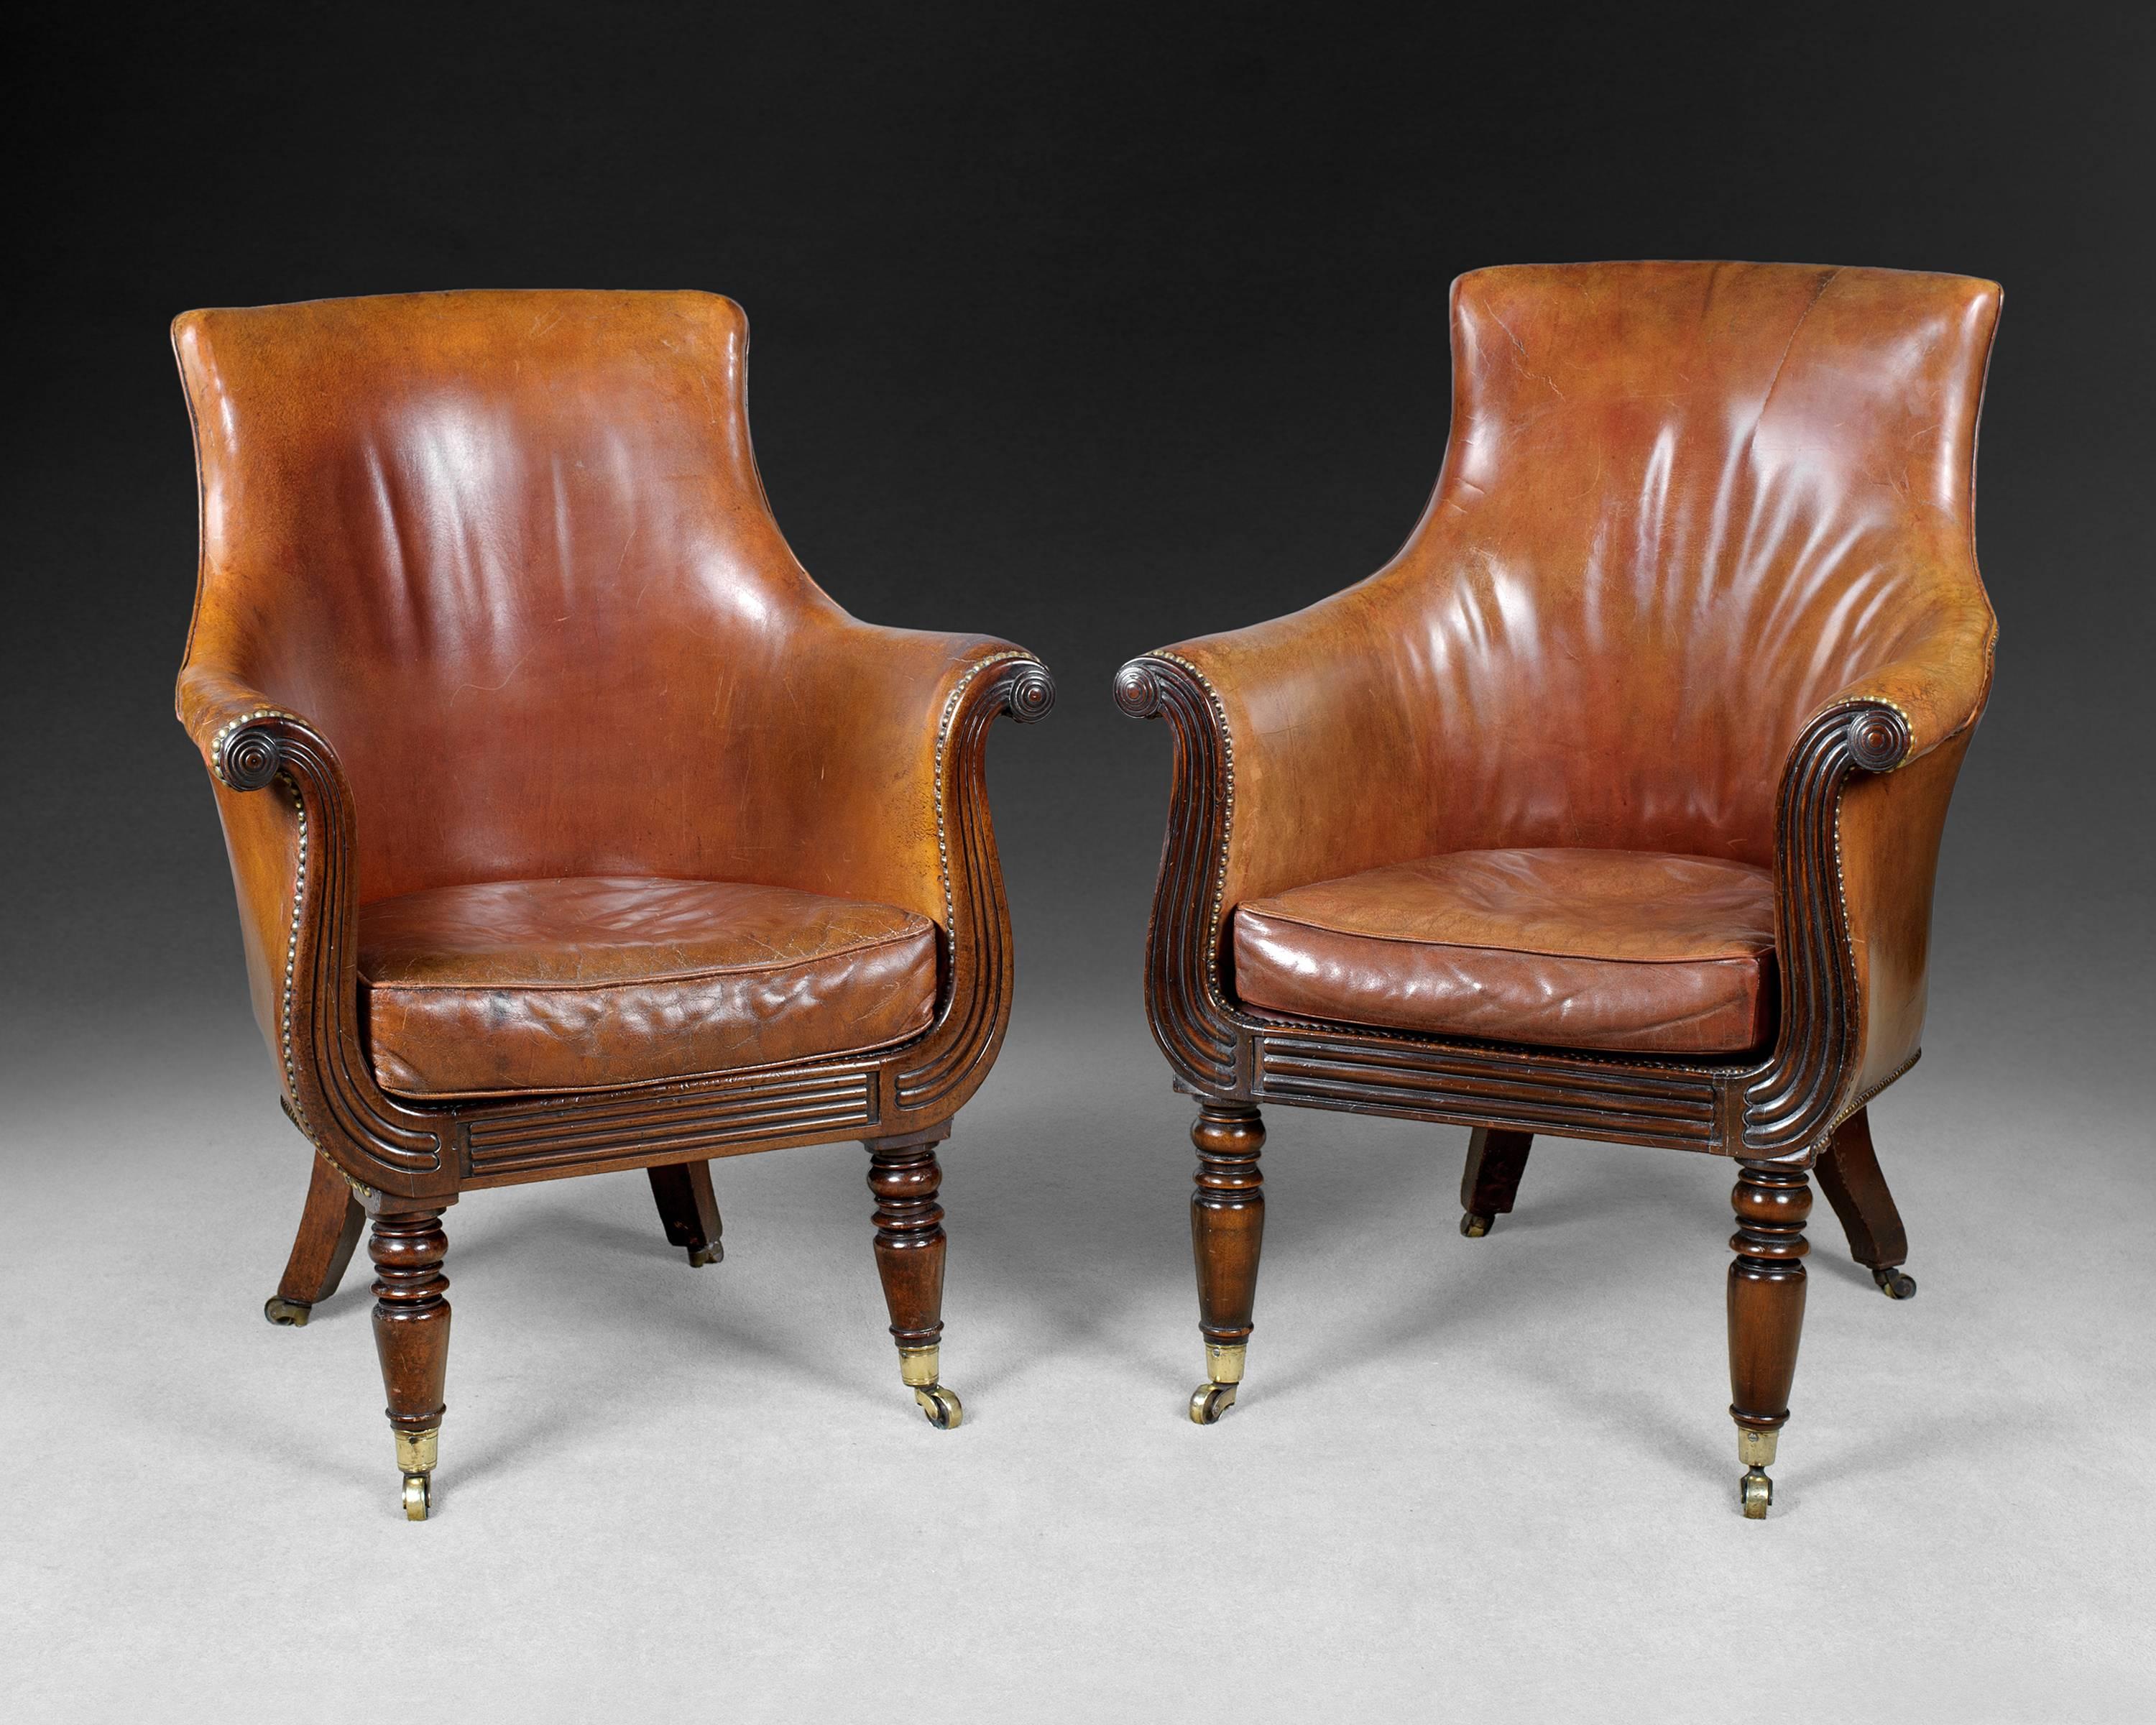 A fine and rare pair of Regency mahogany library armchairs upholstered in faded red hide with brass nailing, the deeply shaped backs flanked by scrolling arms and raised on Lyre-shaped mahogany frames with reeded details and turned front legs